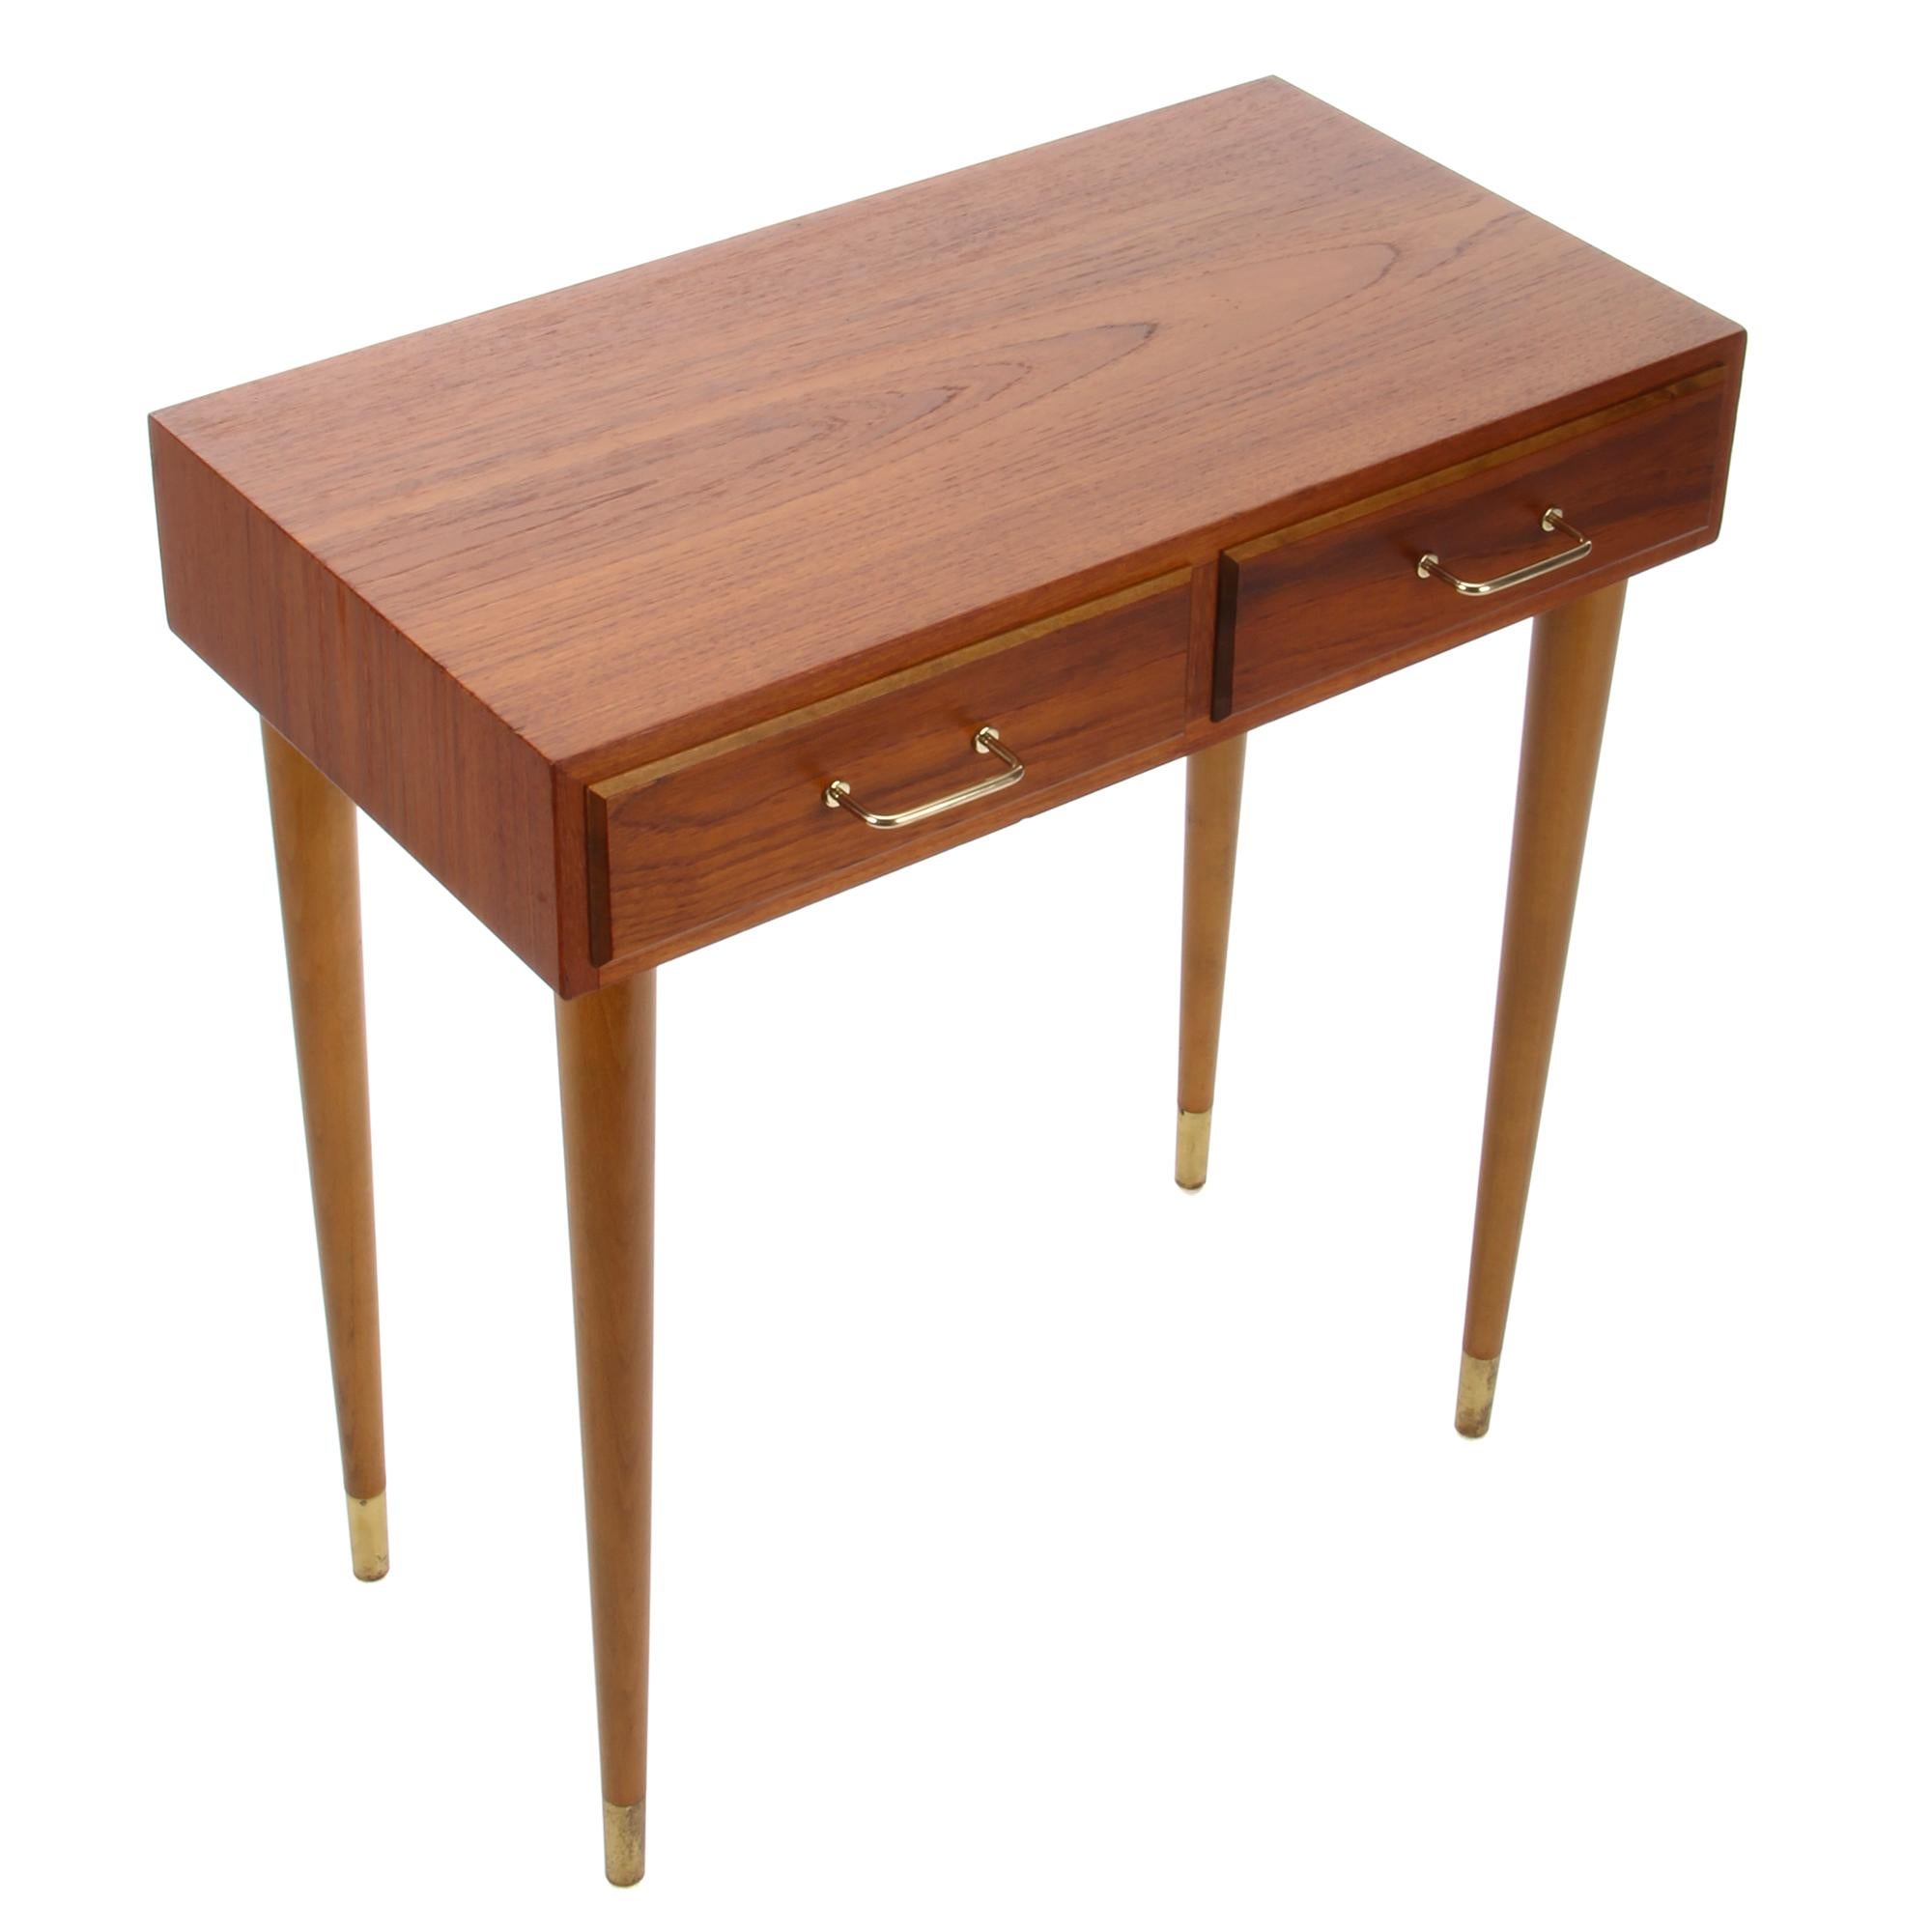 Teak entry table, 1960s Danish vintage end table or console table with drawers and brass handles, in very good vintage condition.

A tall midcentury piece with a narrow rectangular shaped teak body with tapered sliding dovetails joints, on top of